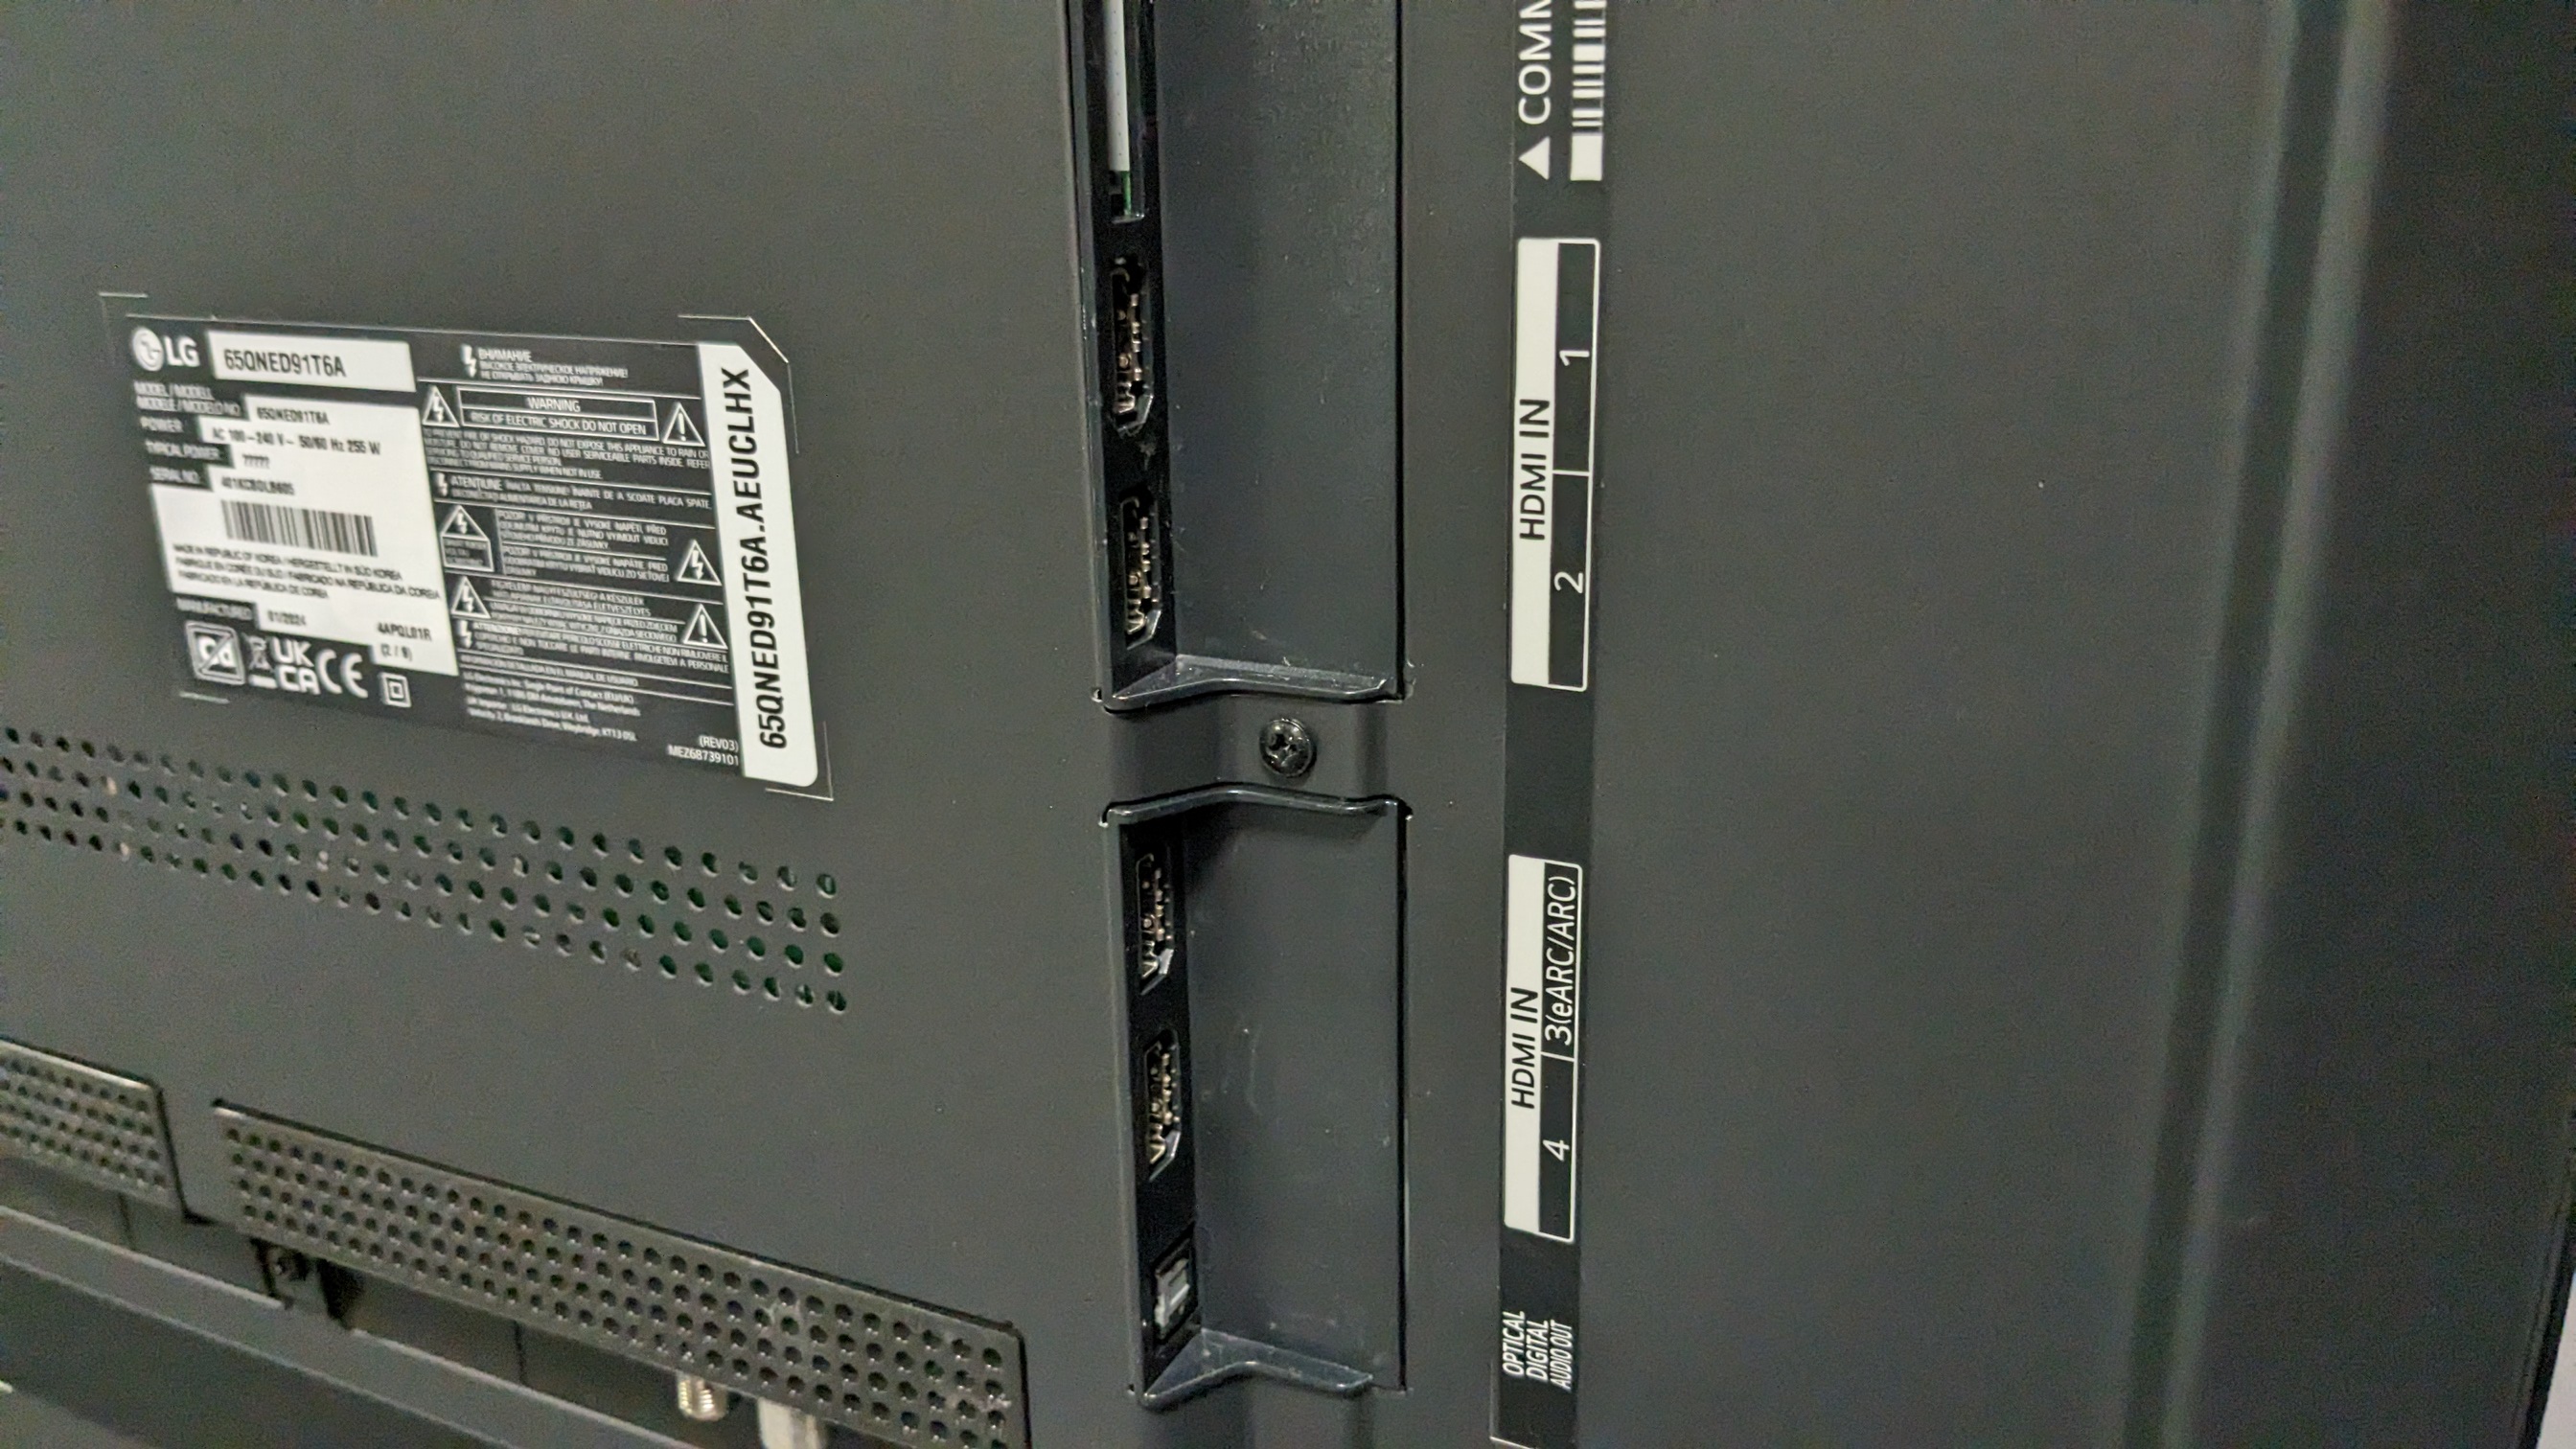 LG QNED91T connections panel